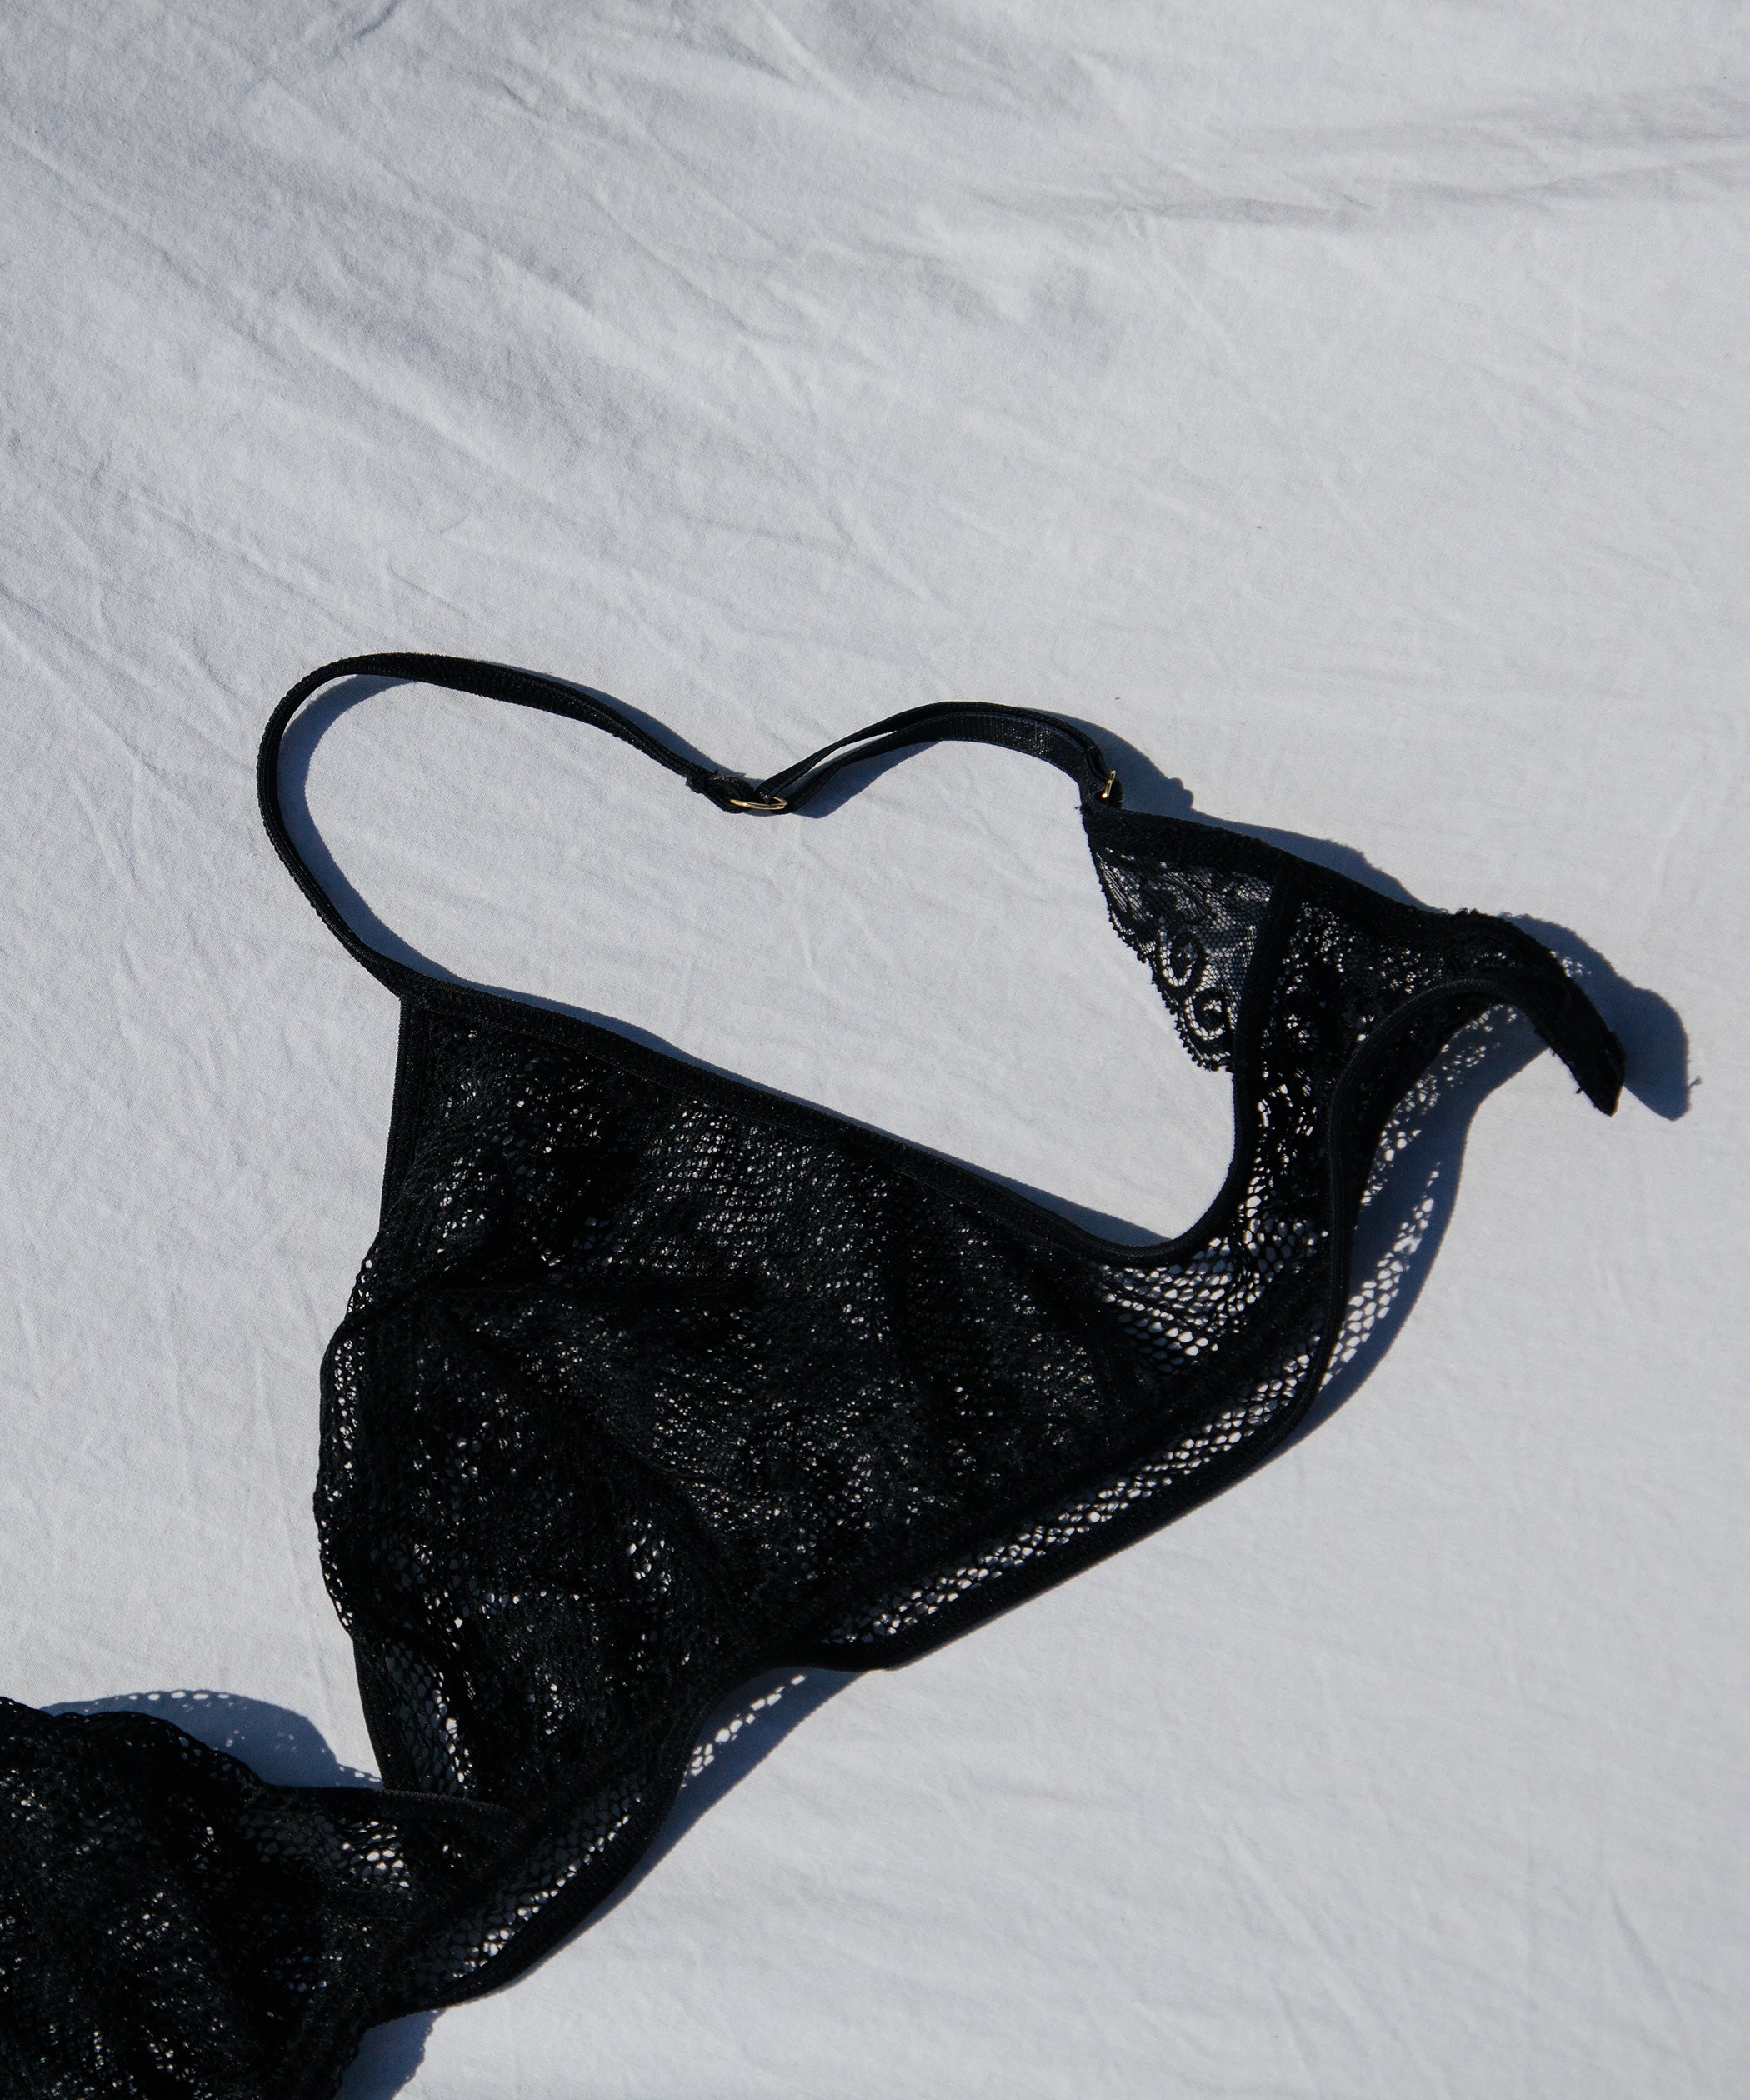 Is my thong supposed to fit both my lips? - Quora